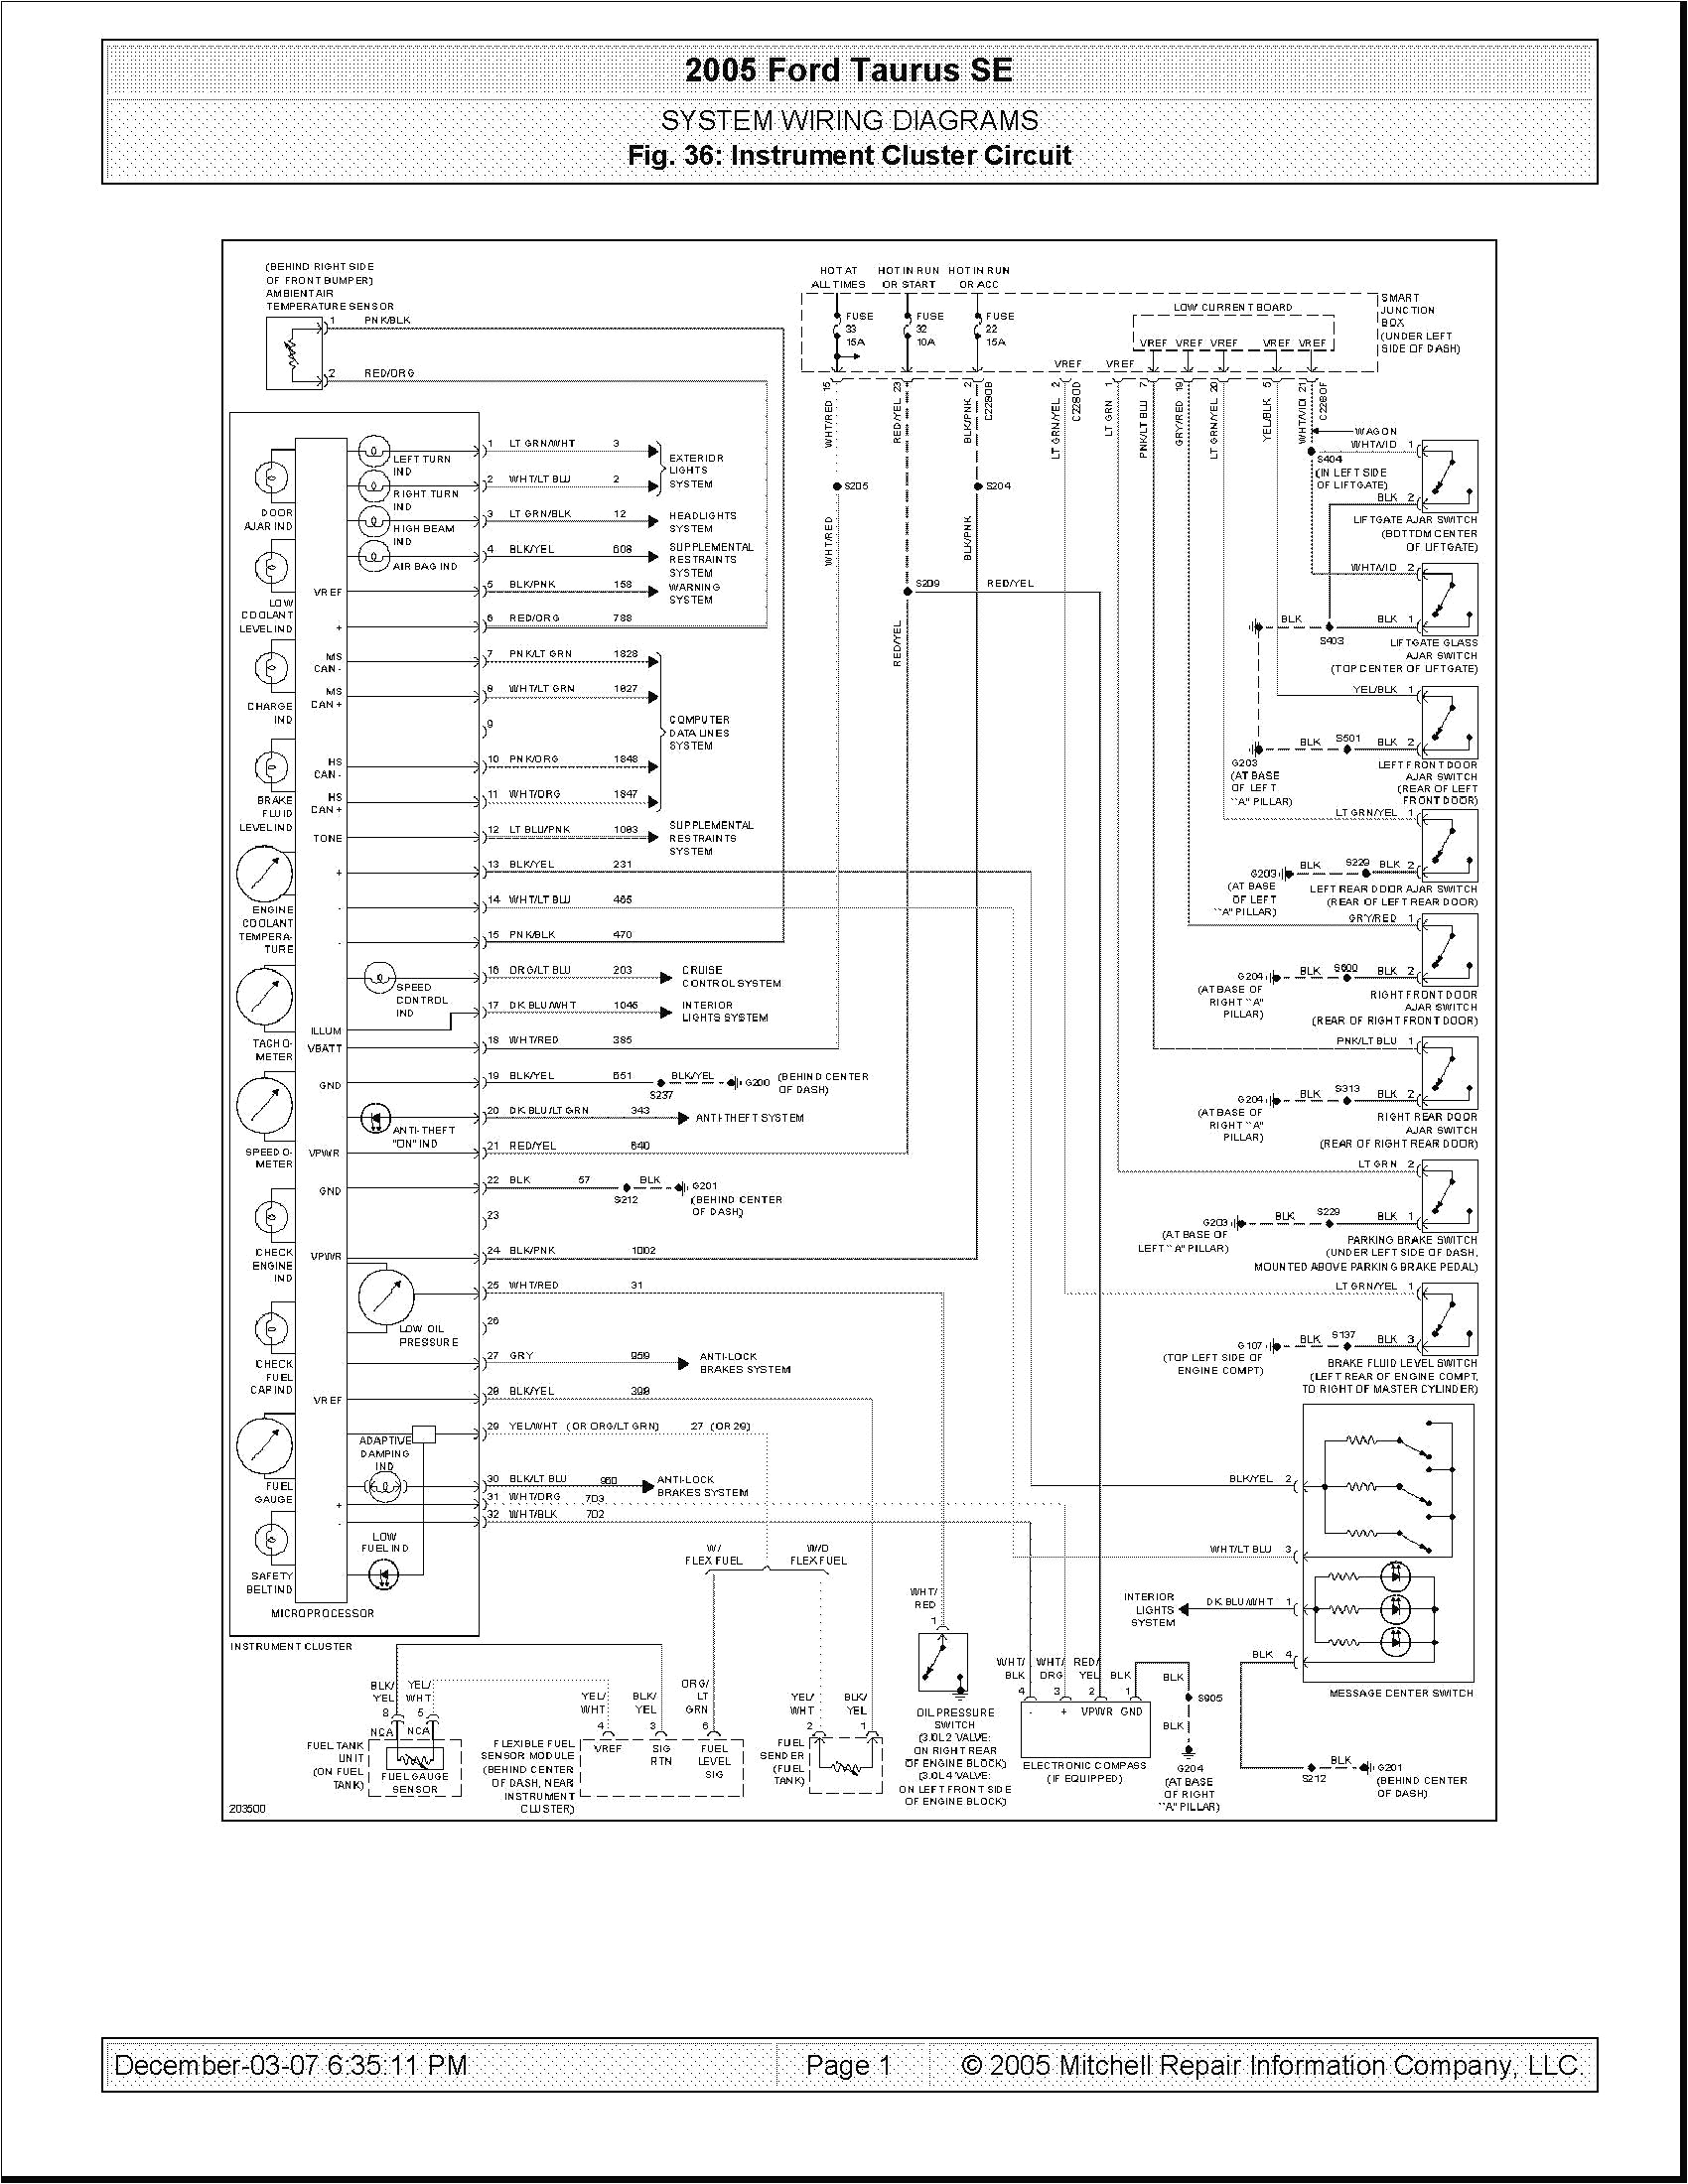 2005 ford freestar stereo wiring diagram wiring diagram completed wiring diagram color code further 2005 ford freestar radio wiring